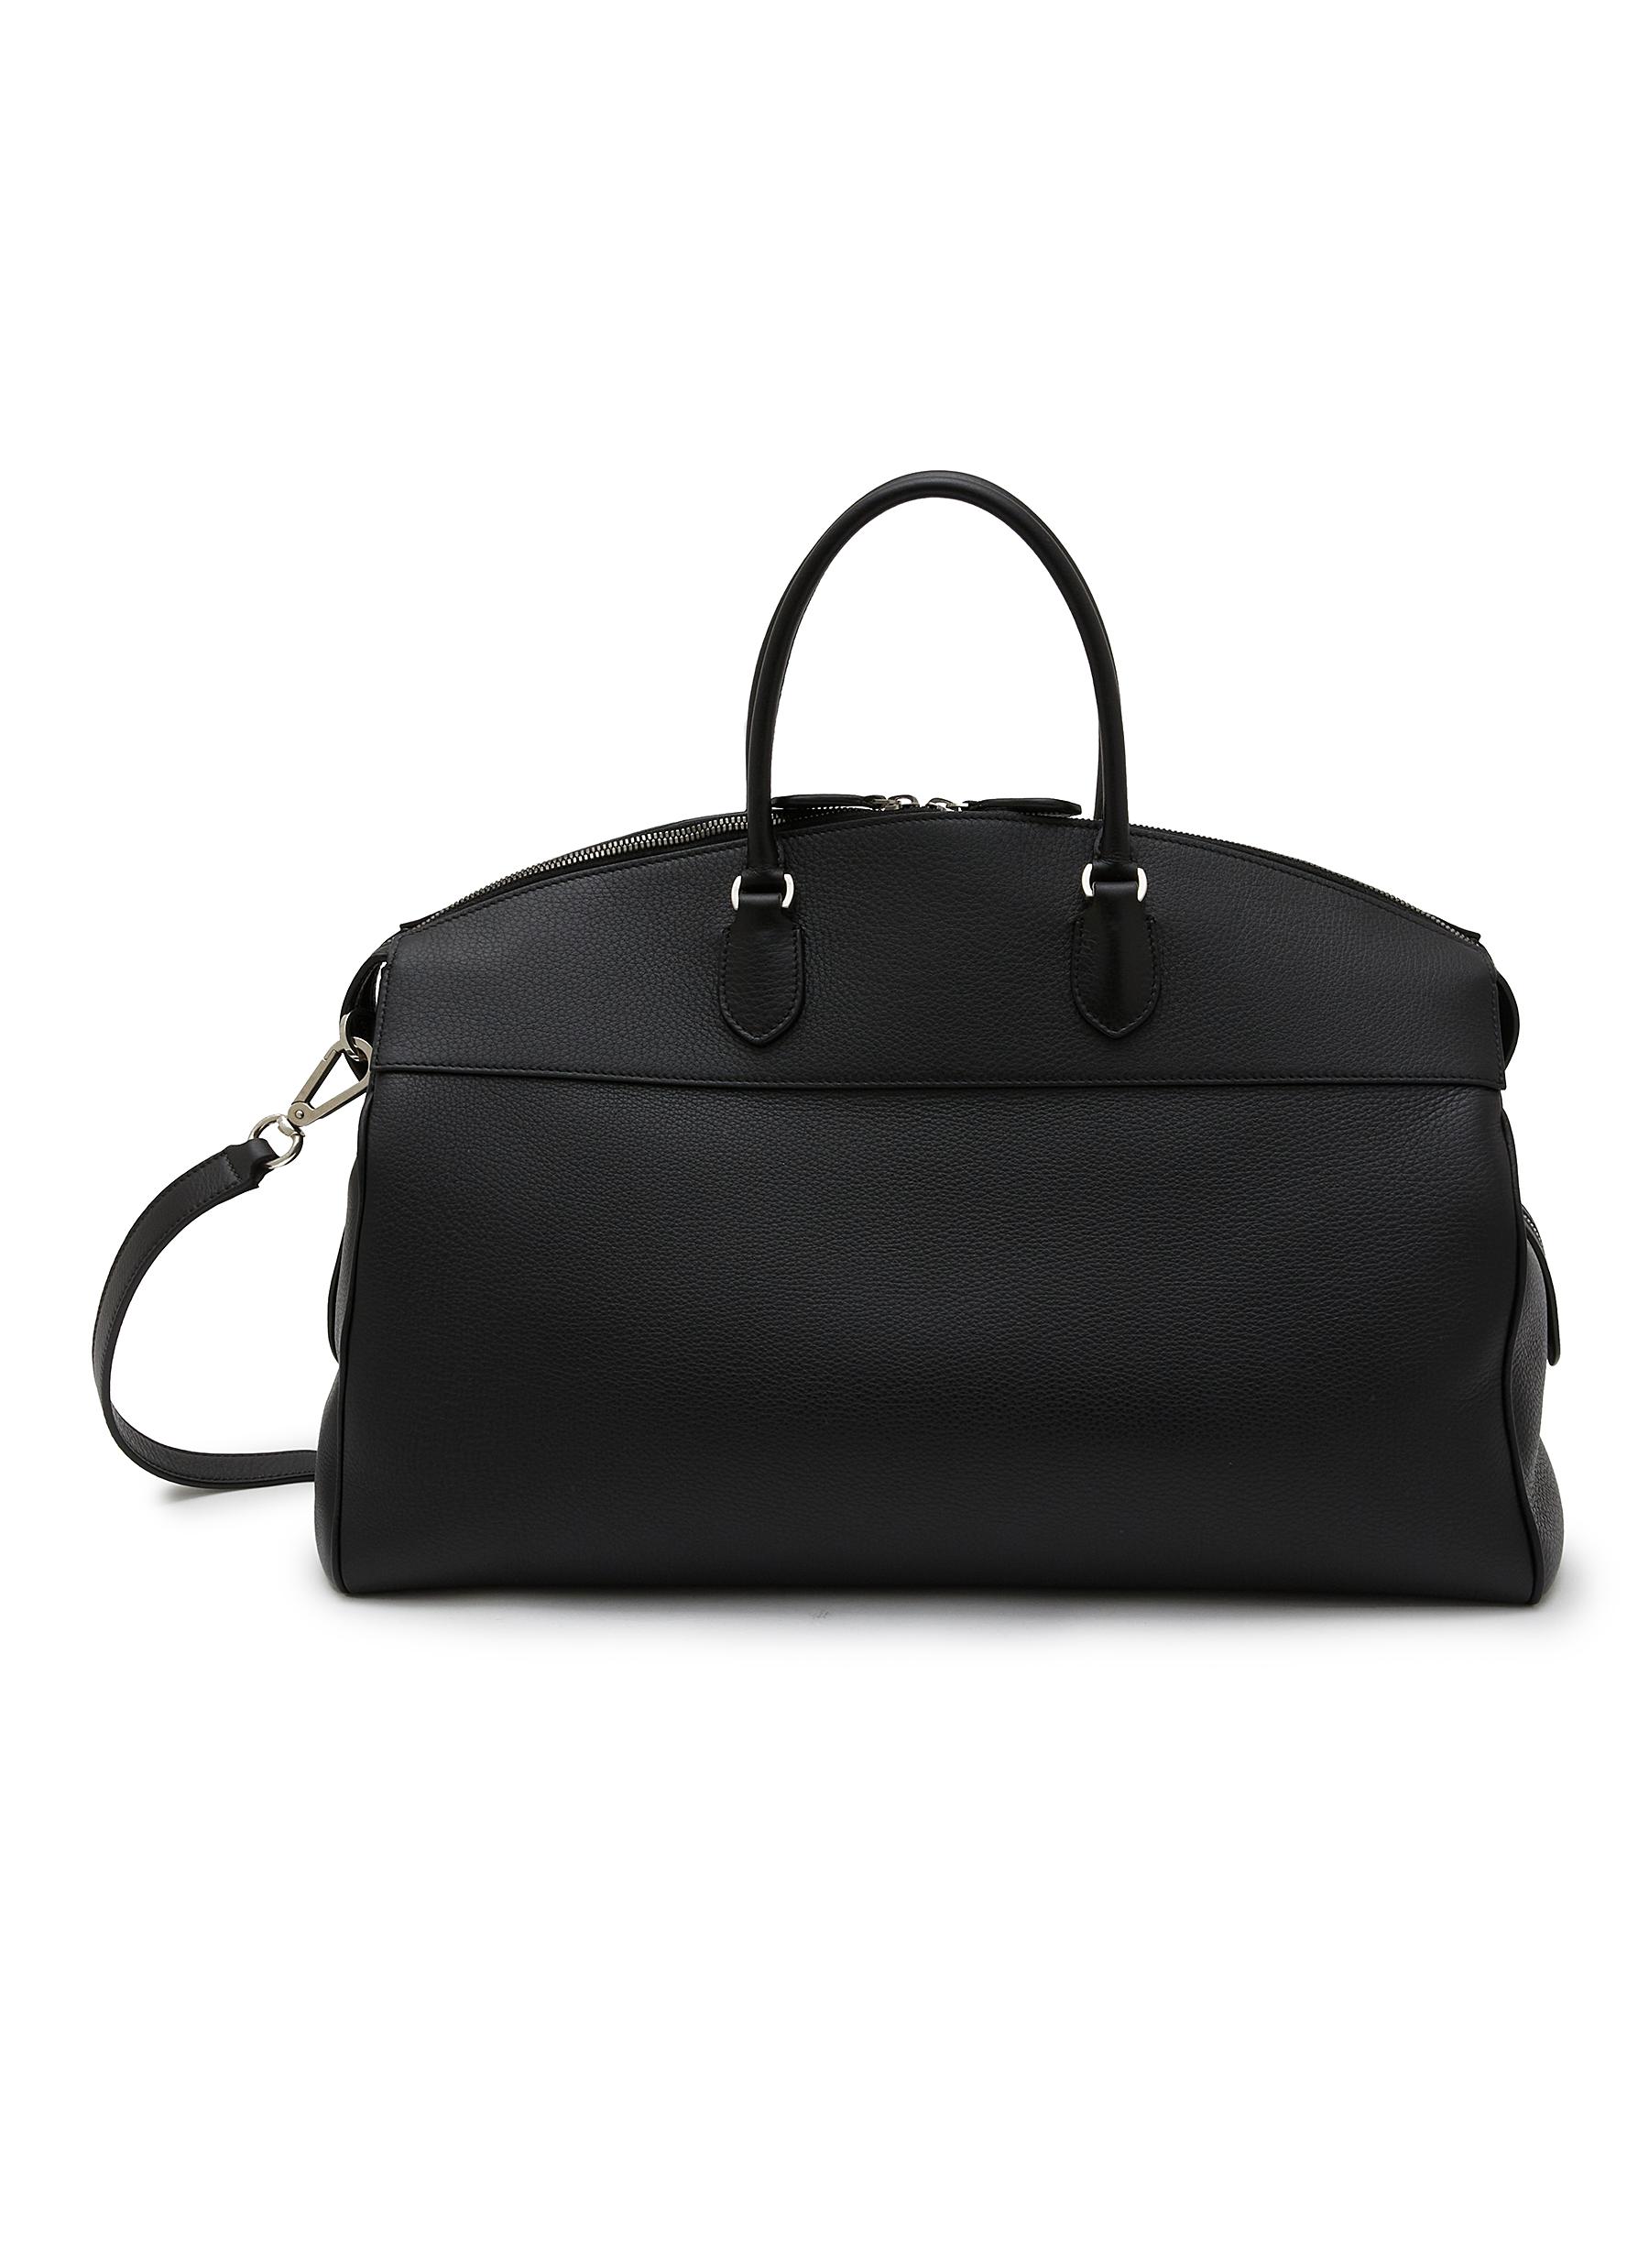 George Grained Leather Duffle Bag